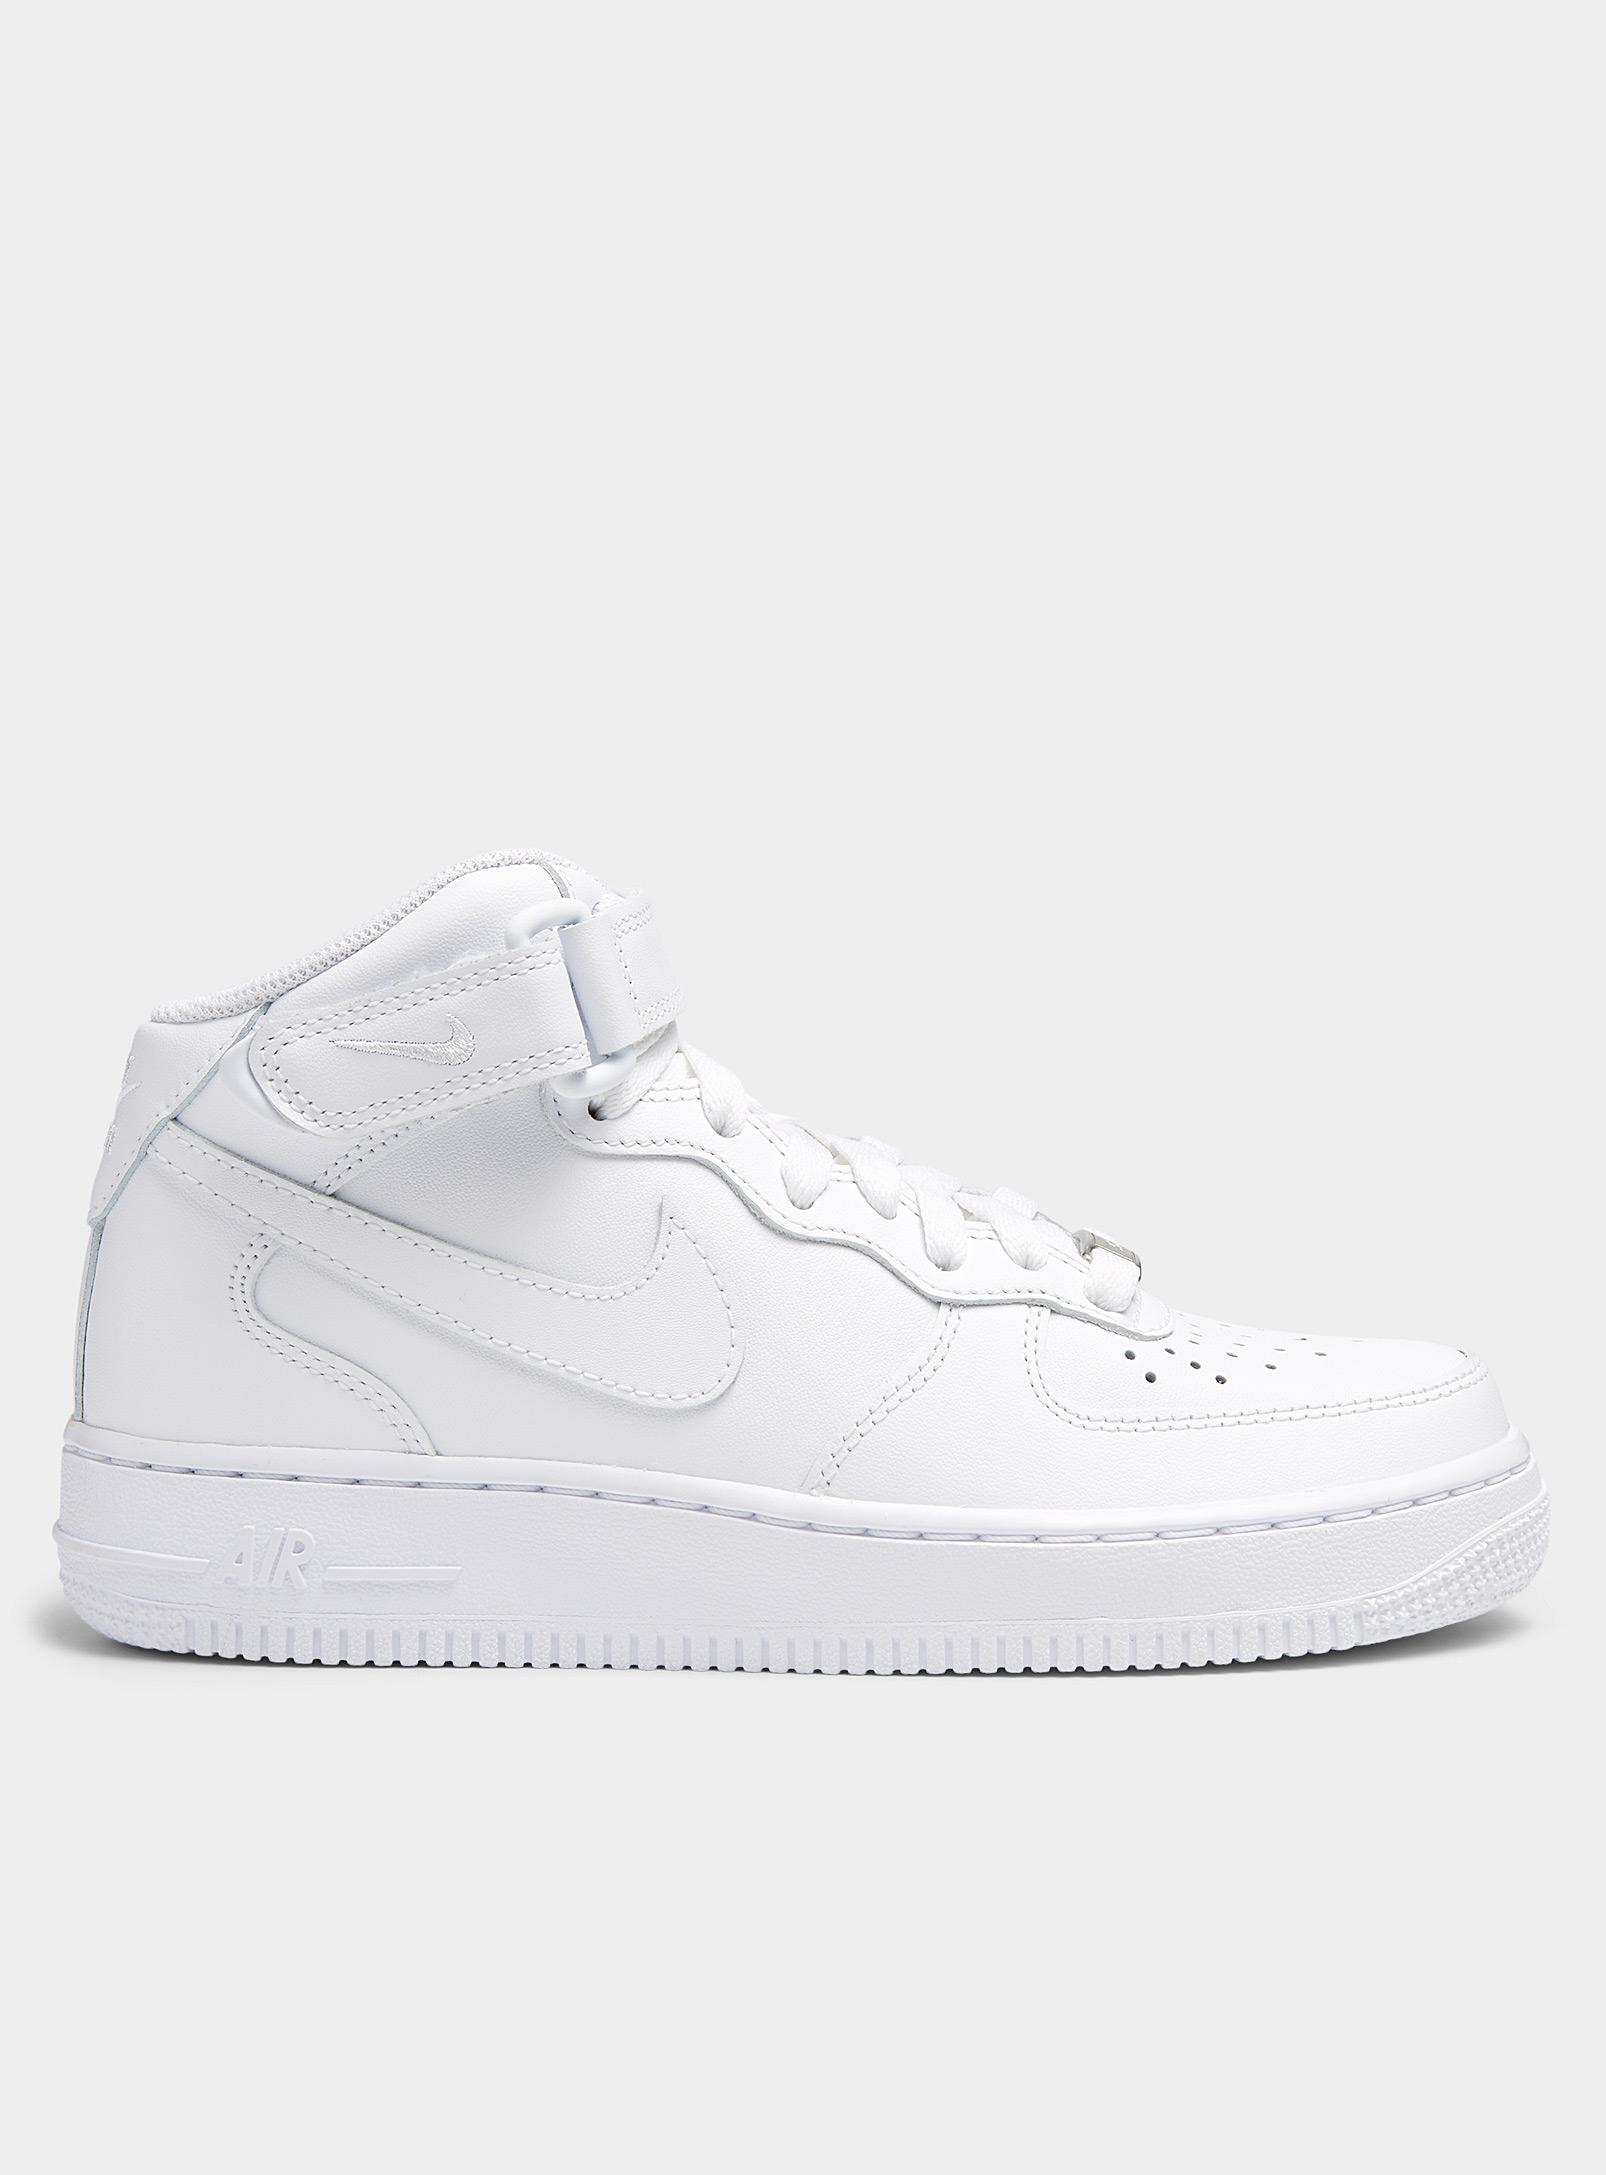 Nike Air Force 1 Mid '07 Sneakers Women in White | Lyst